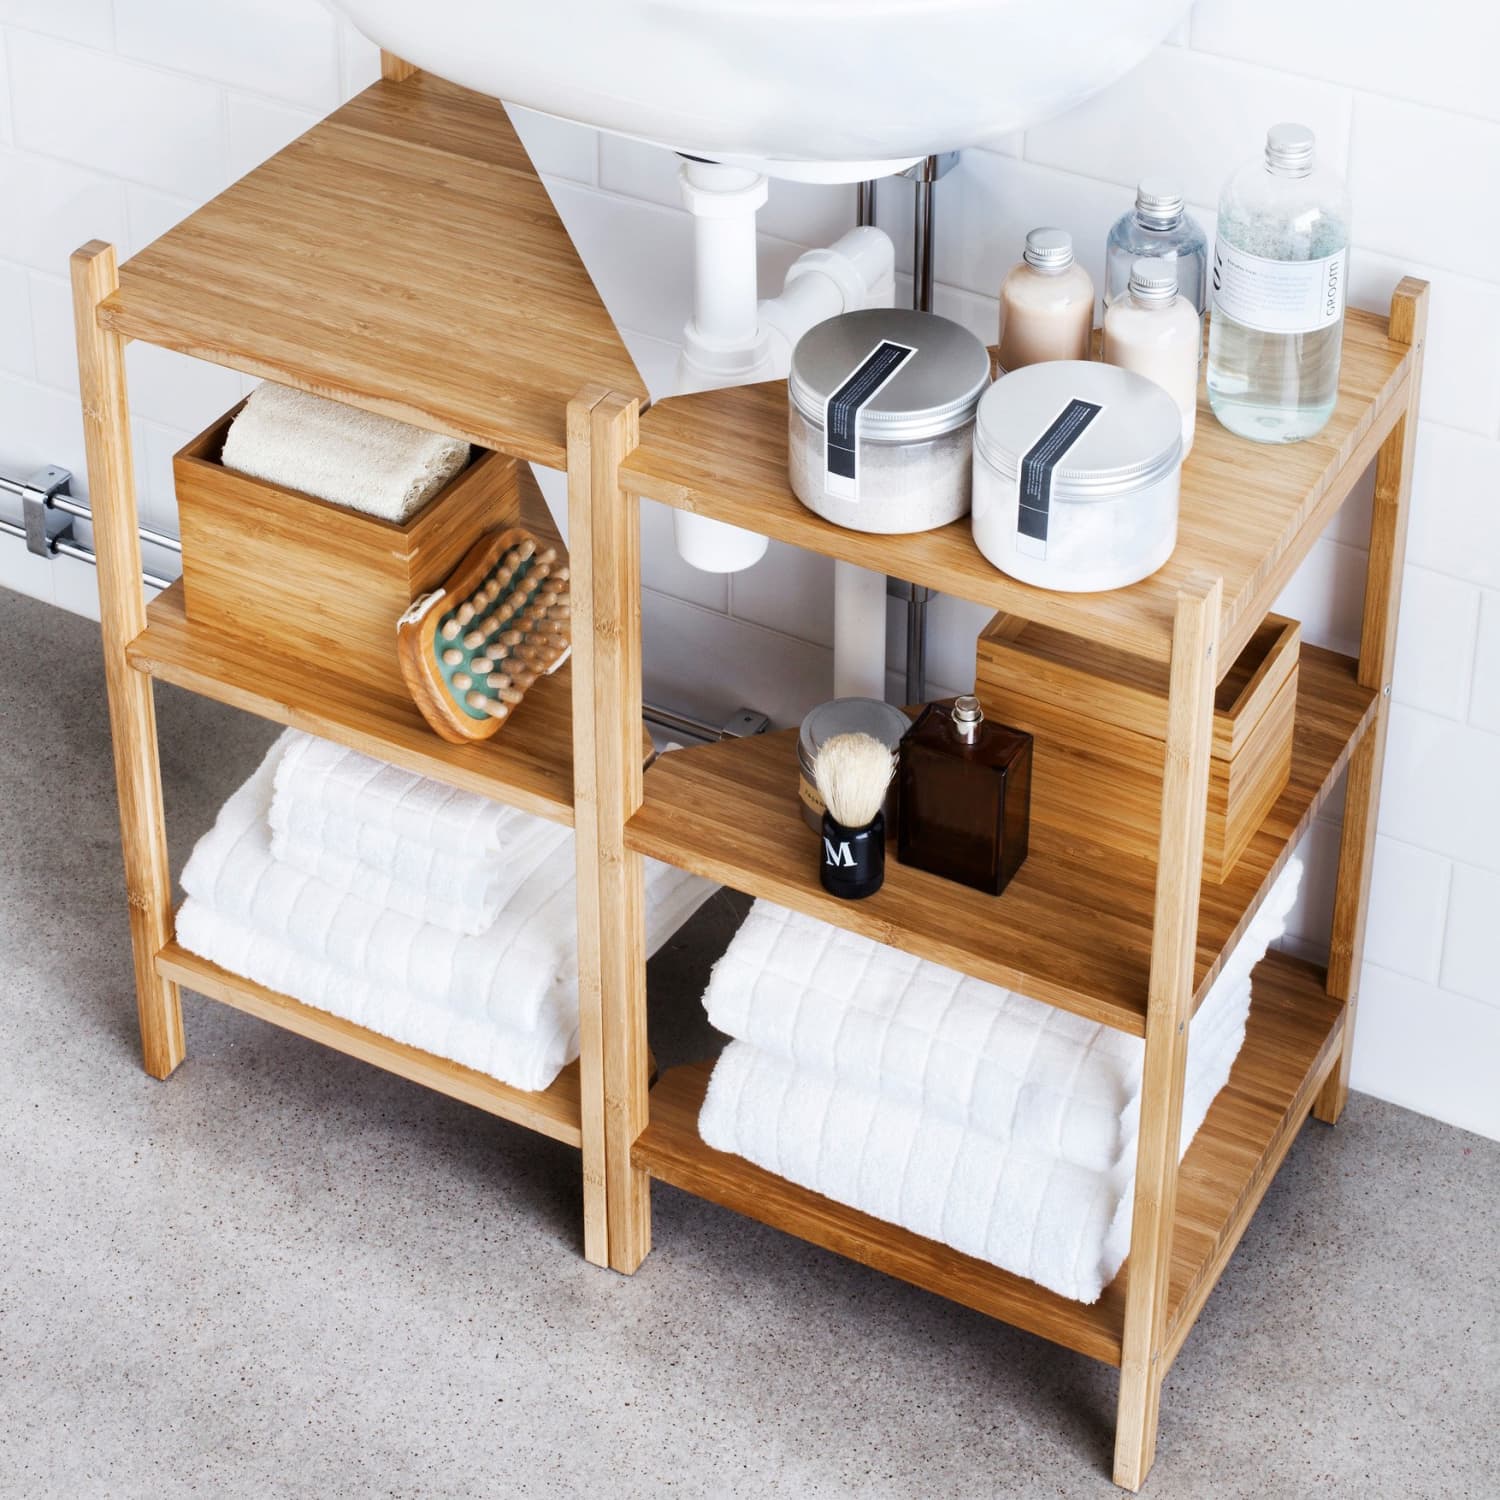 How To Organize Your Under Sink Storage - Step-By-Step Project